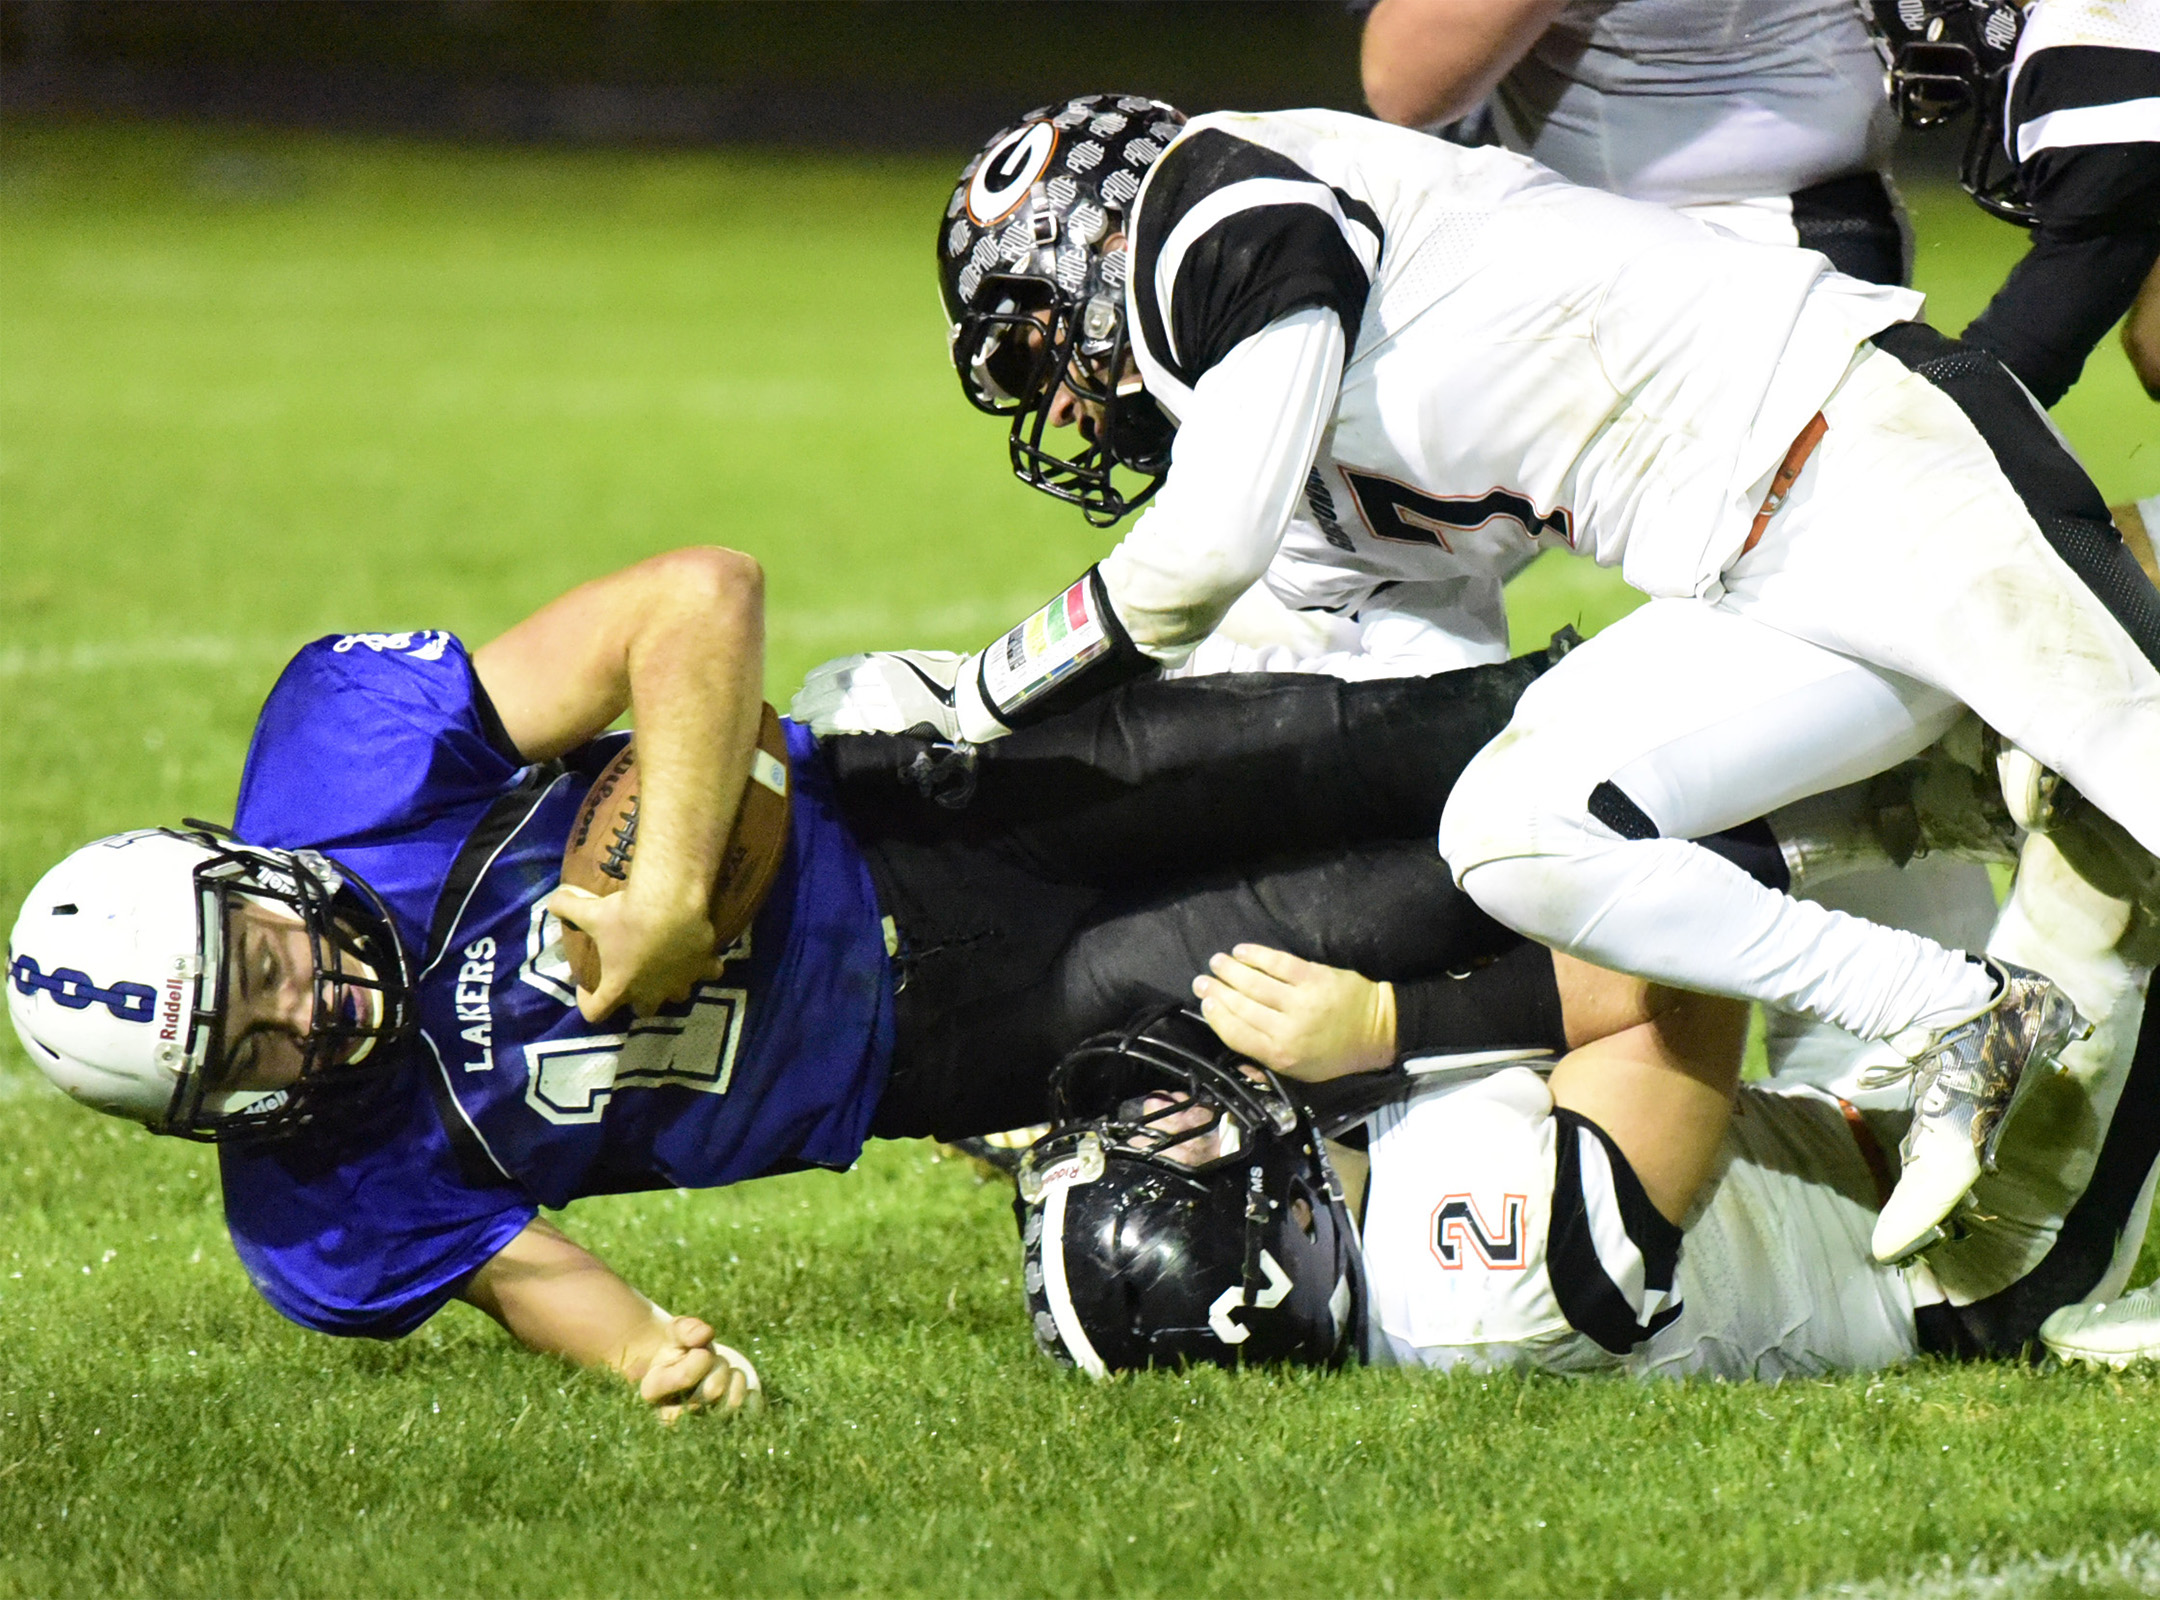 Danbury's Justin Tibbels is brought down by Gibsonburg's Isaak Arriaga, top, and Madison Jaso.